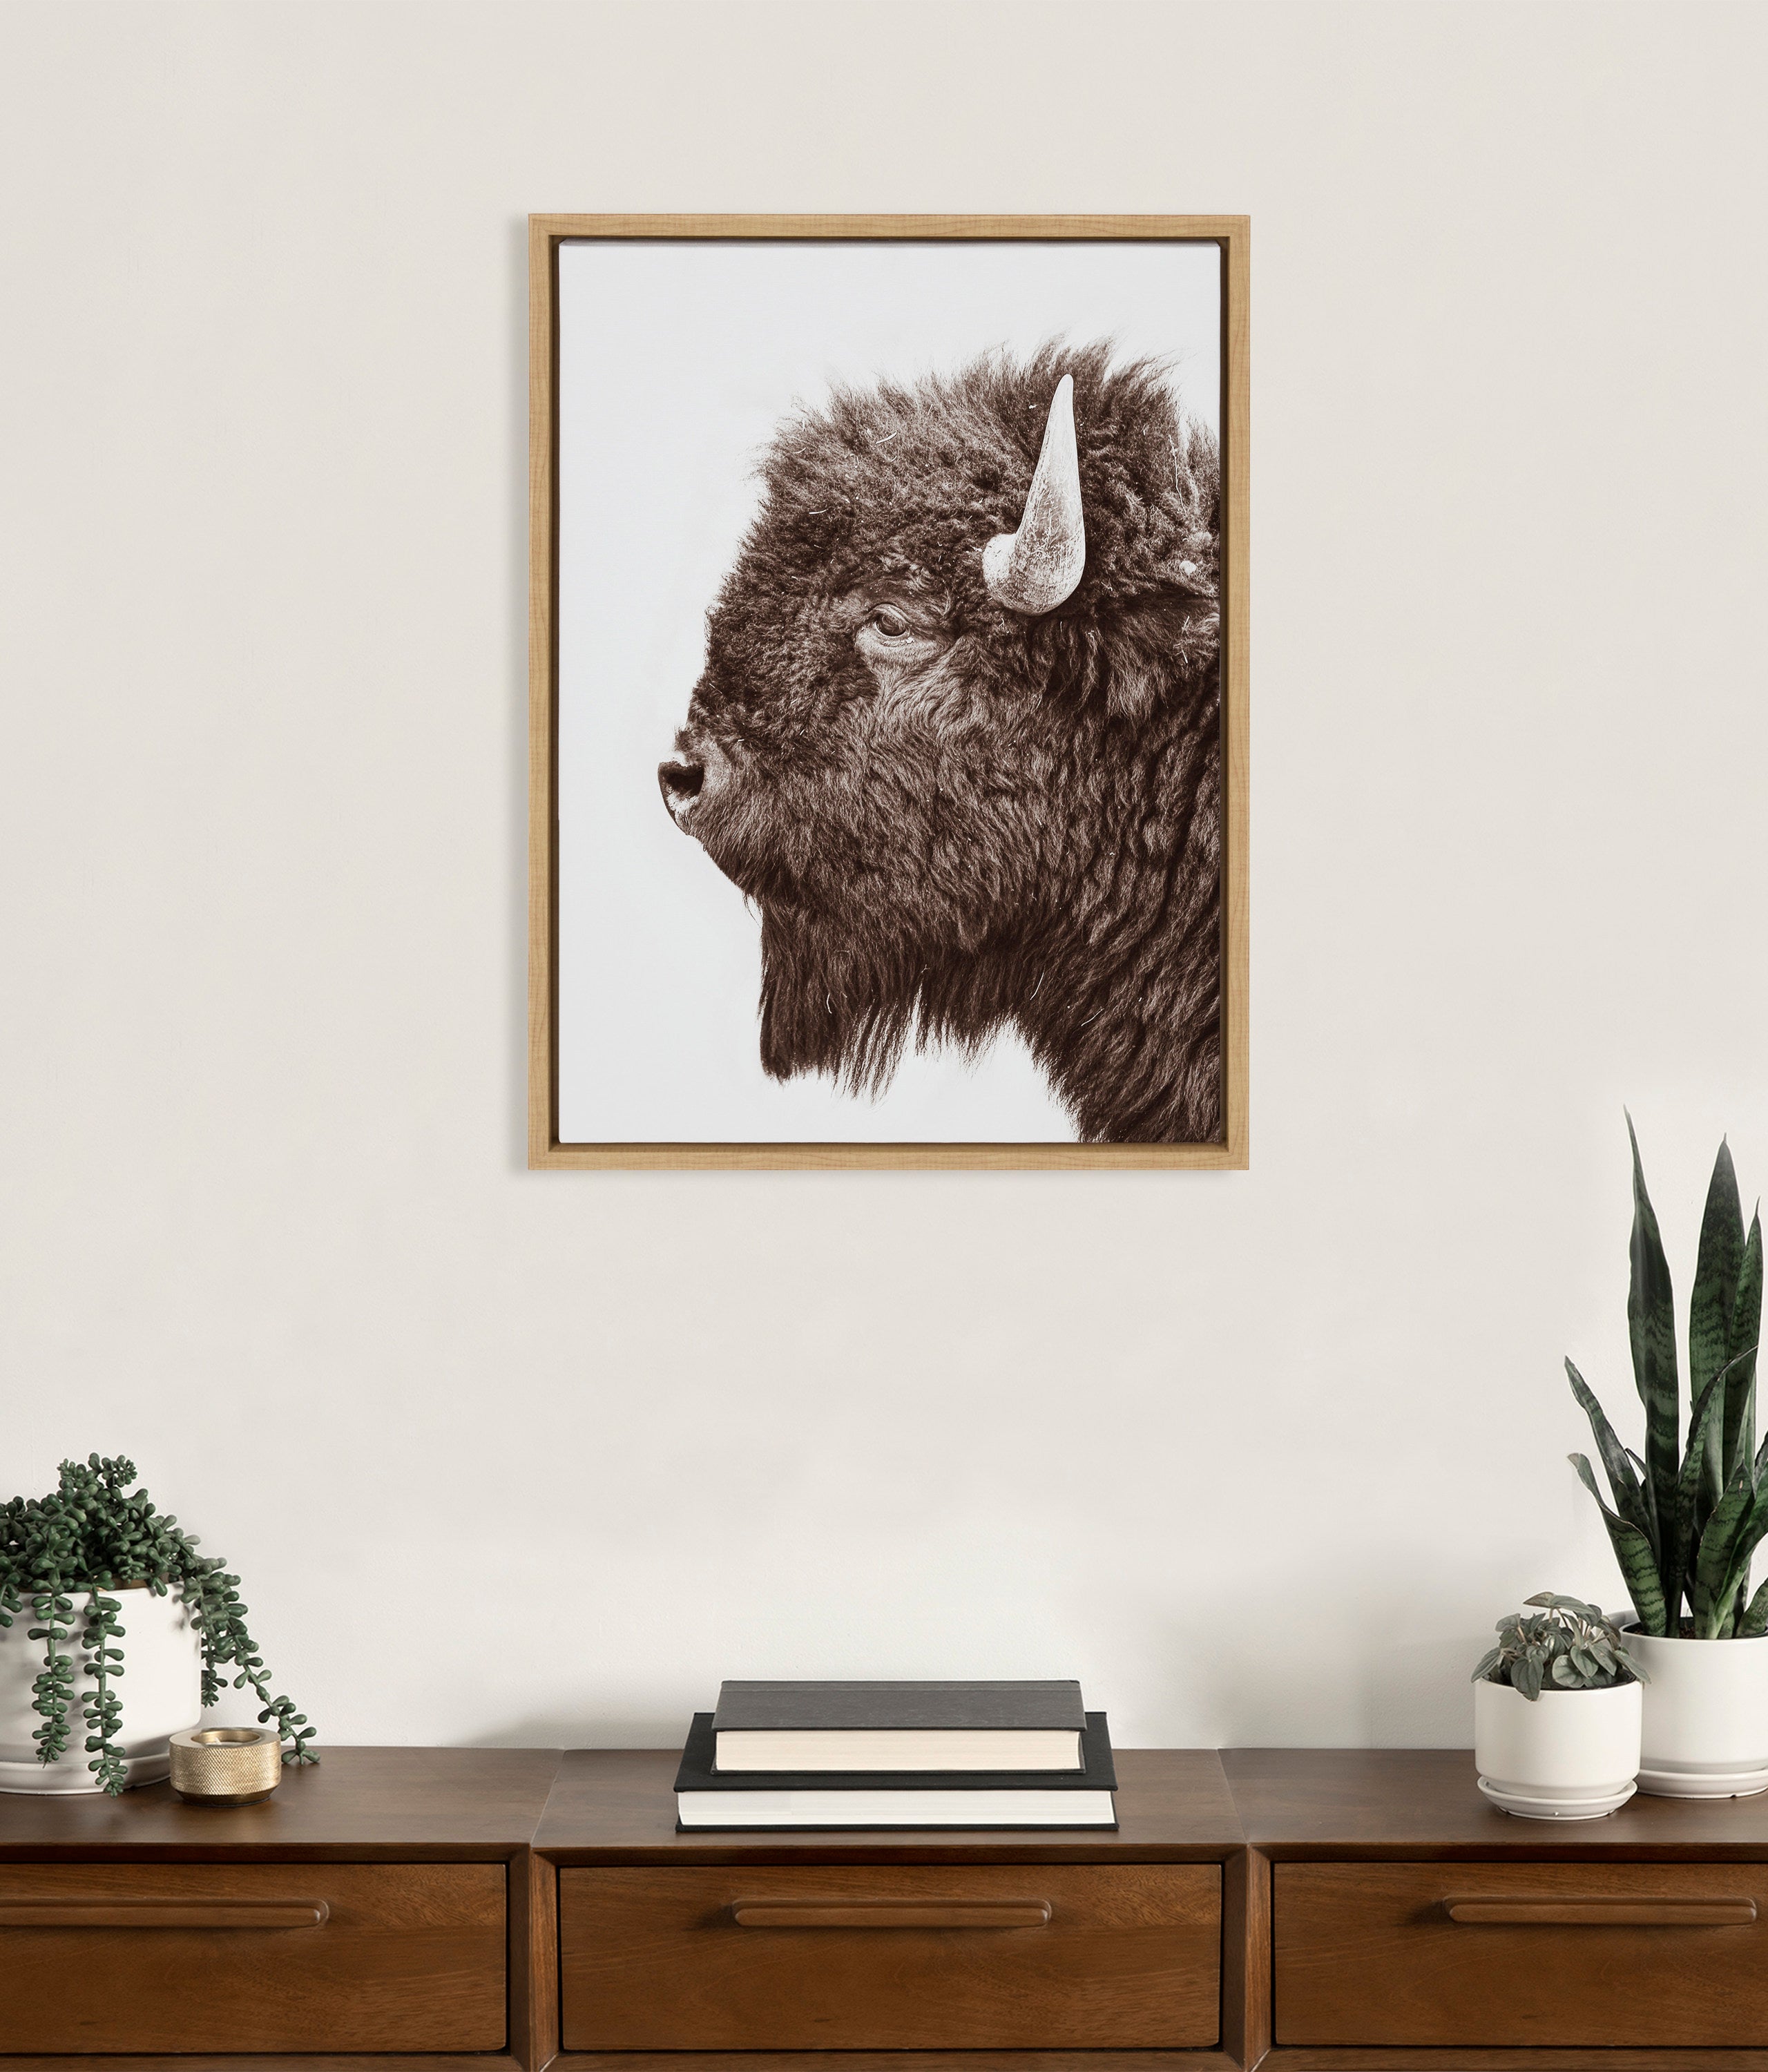 Sylvie Bison Profile Framed Canvas by Amy Peterson Art Studio